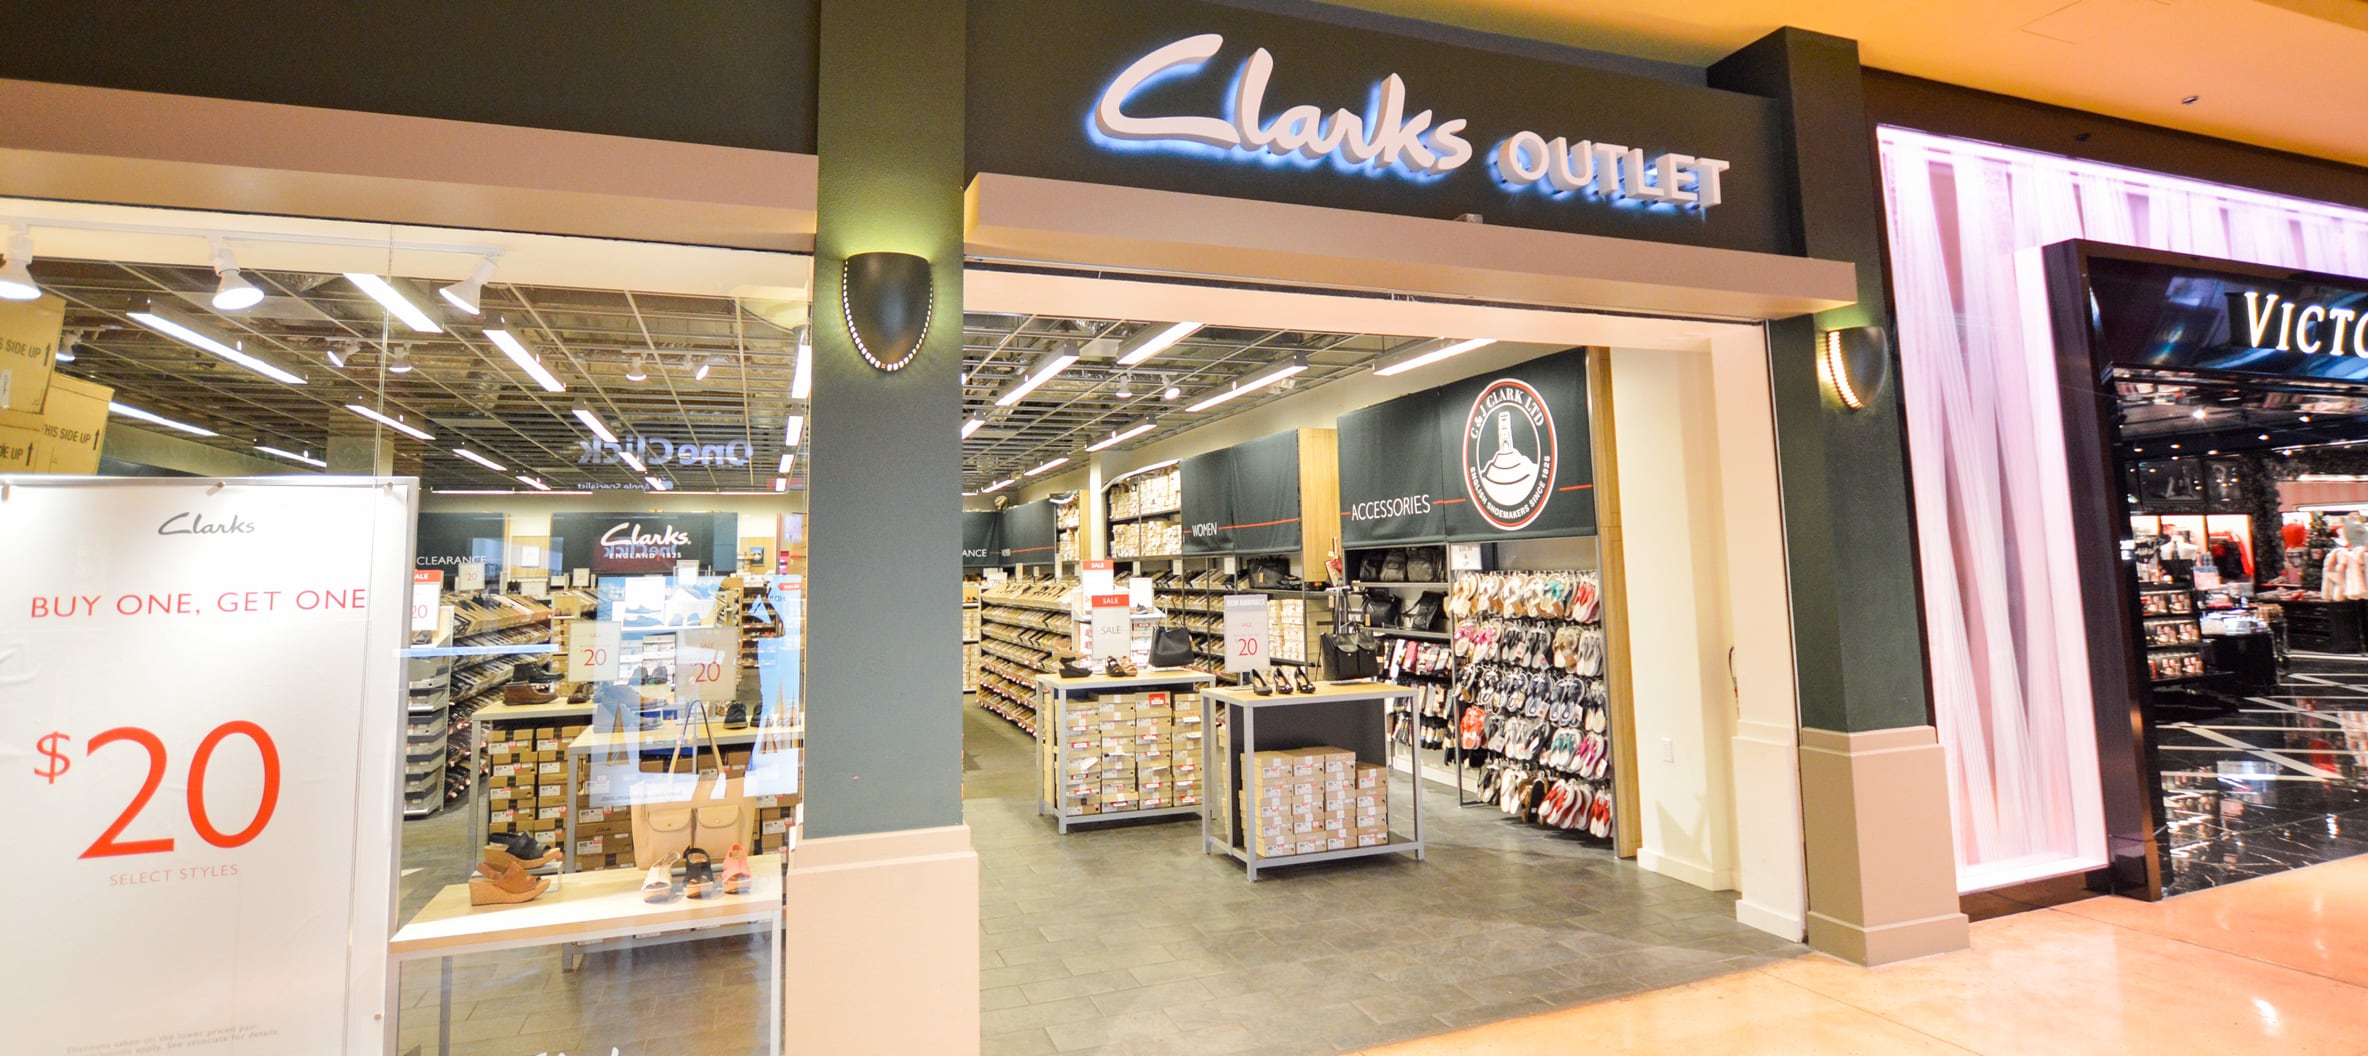 clarks bostonian outlet great mall